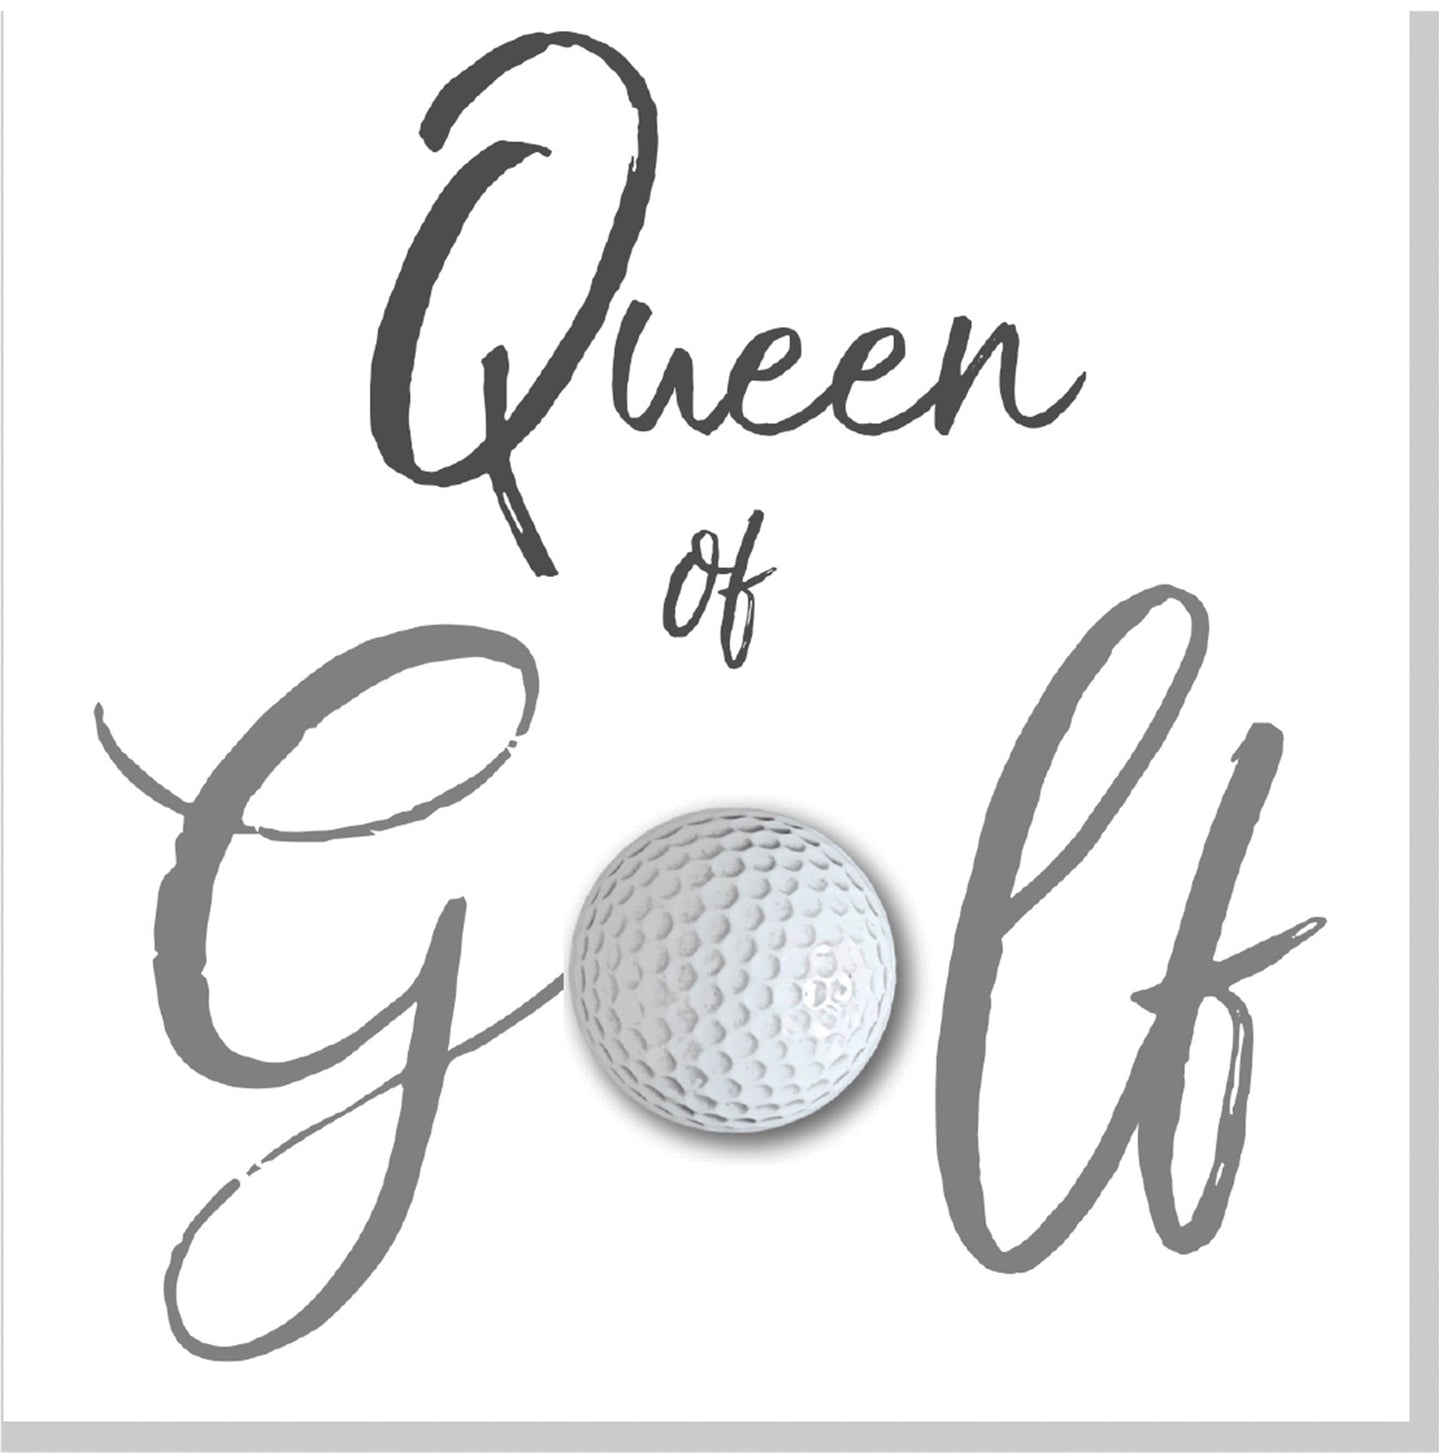 Queen of Golf square card